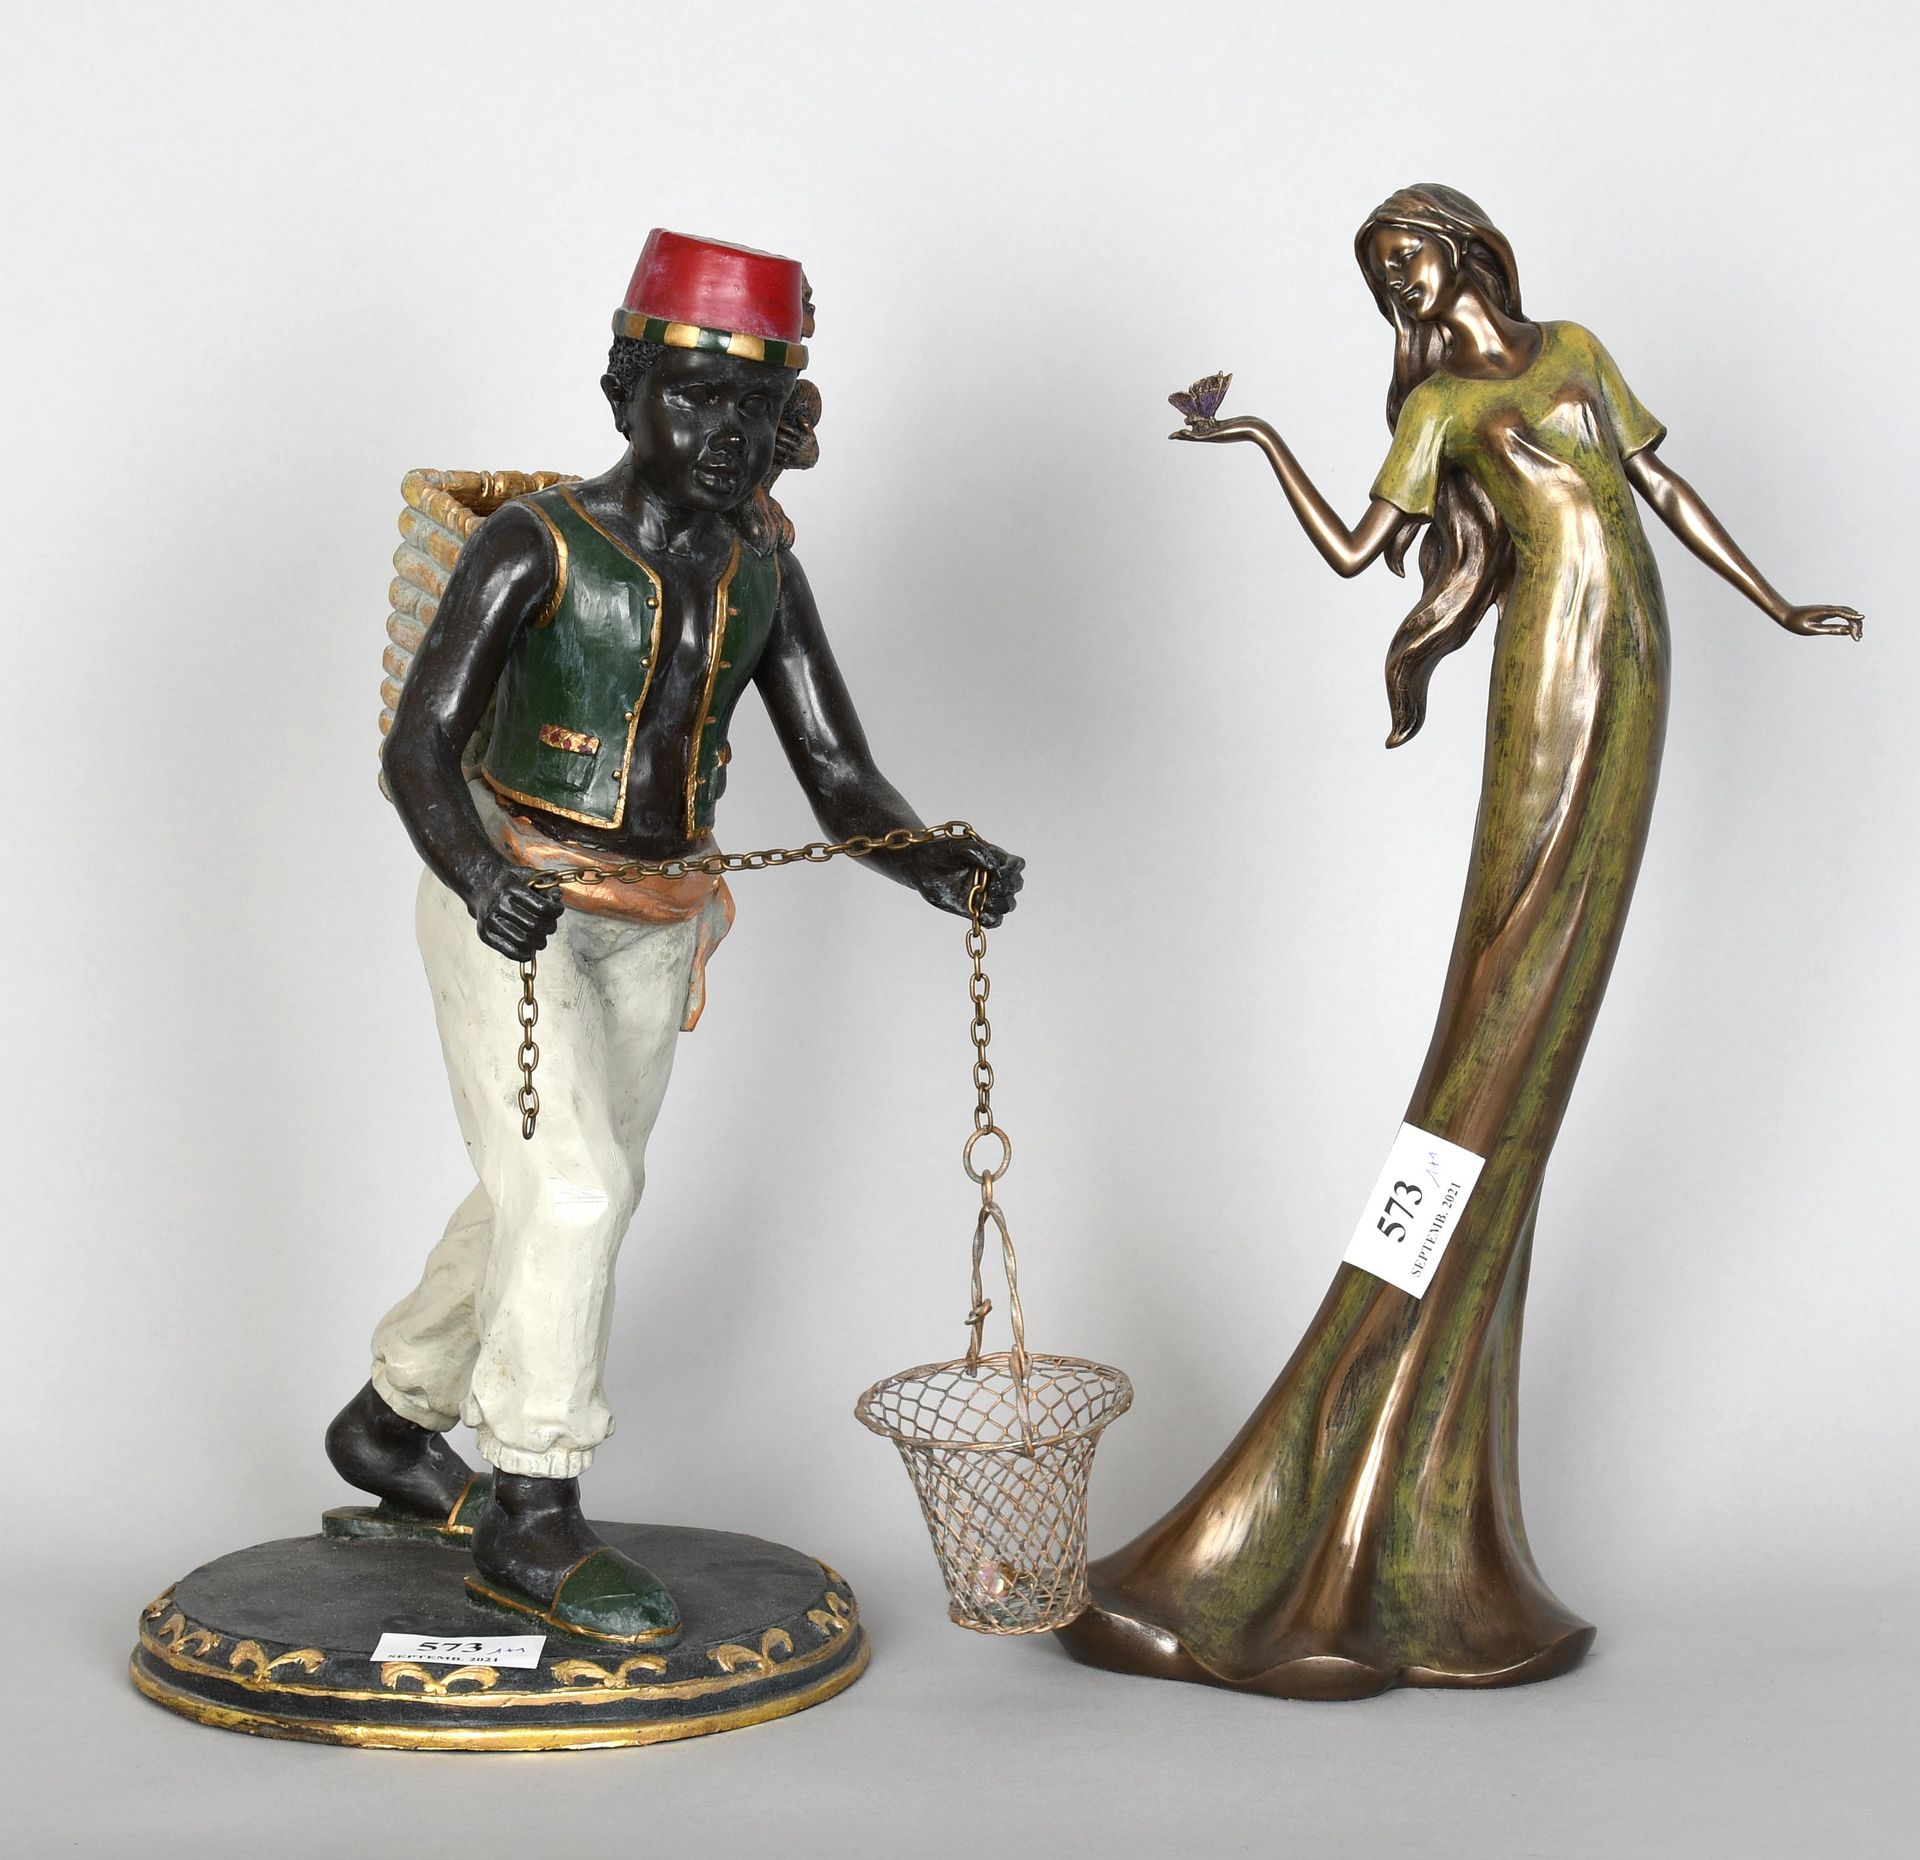 Null One more decorative statues : "Elegant 1900" and "Monkey trainer" - Height &hellip;